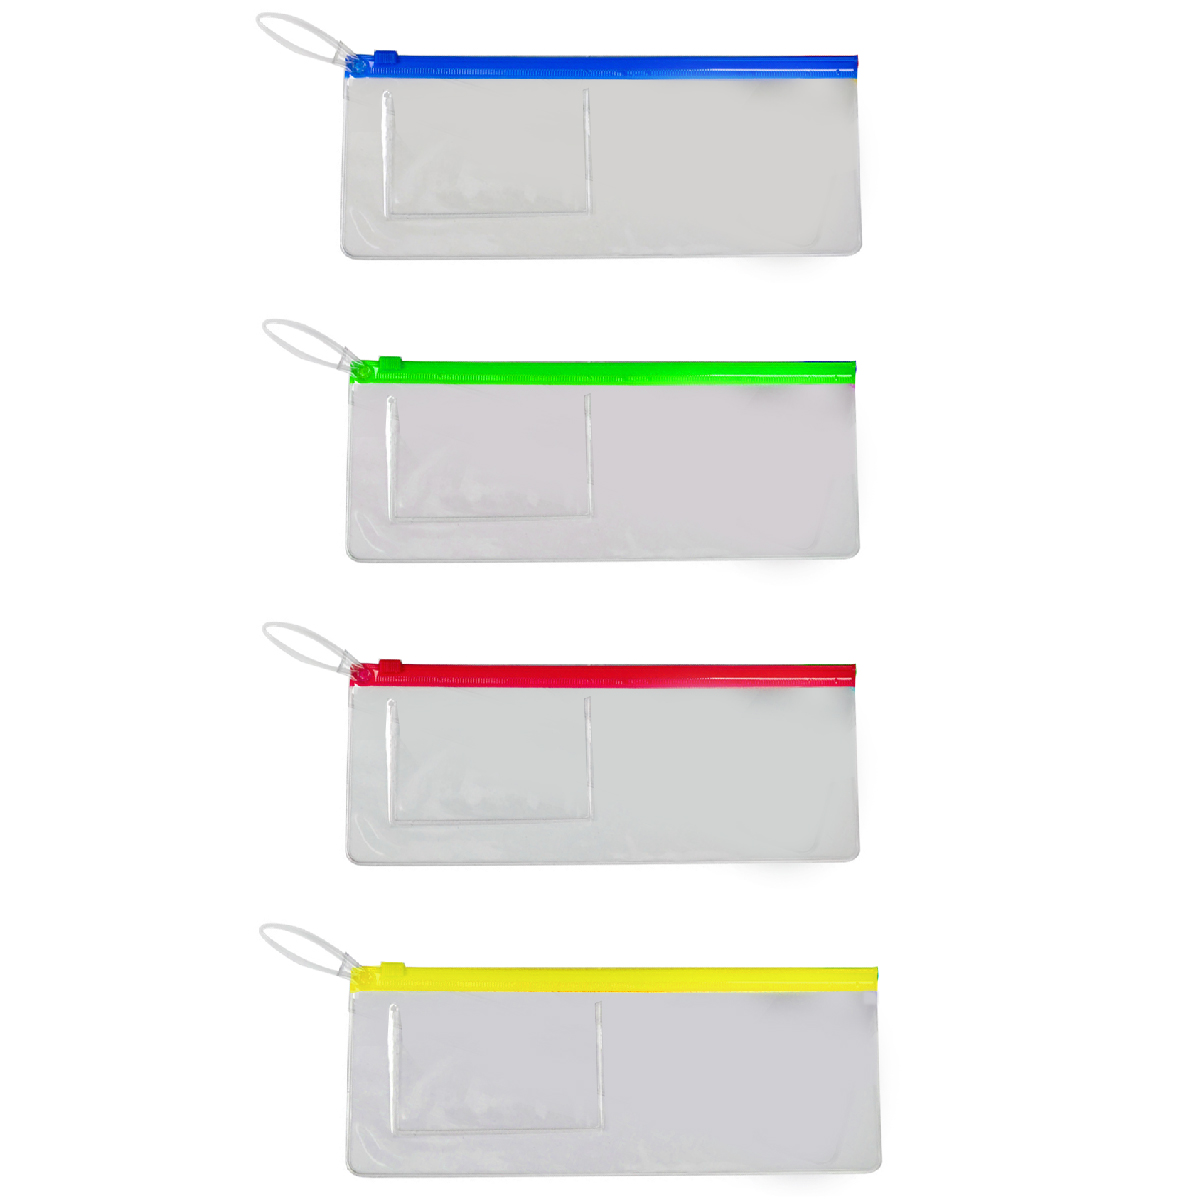 Assorted - Colors Will Vary Vinyl Pouch 